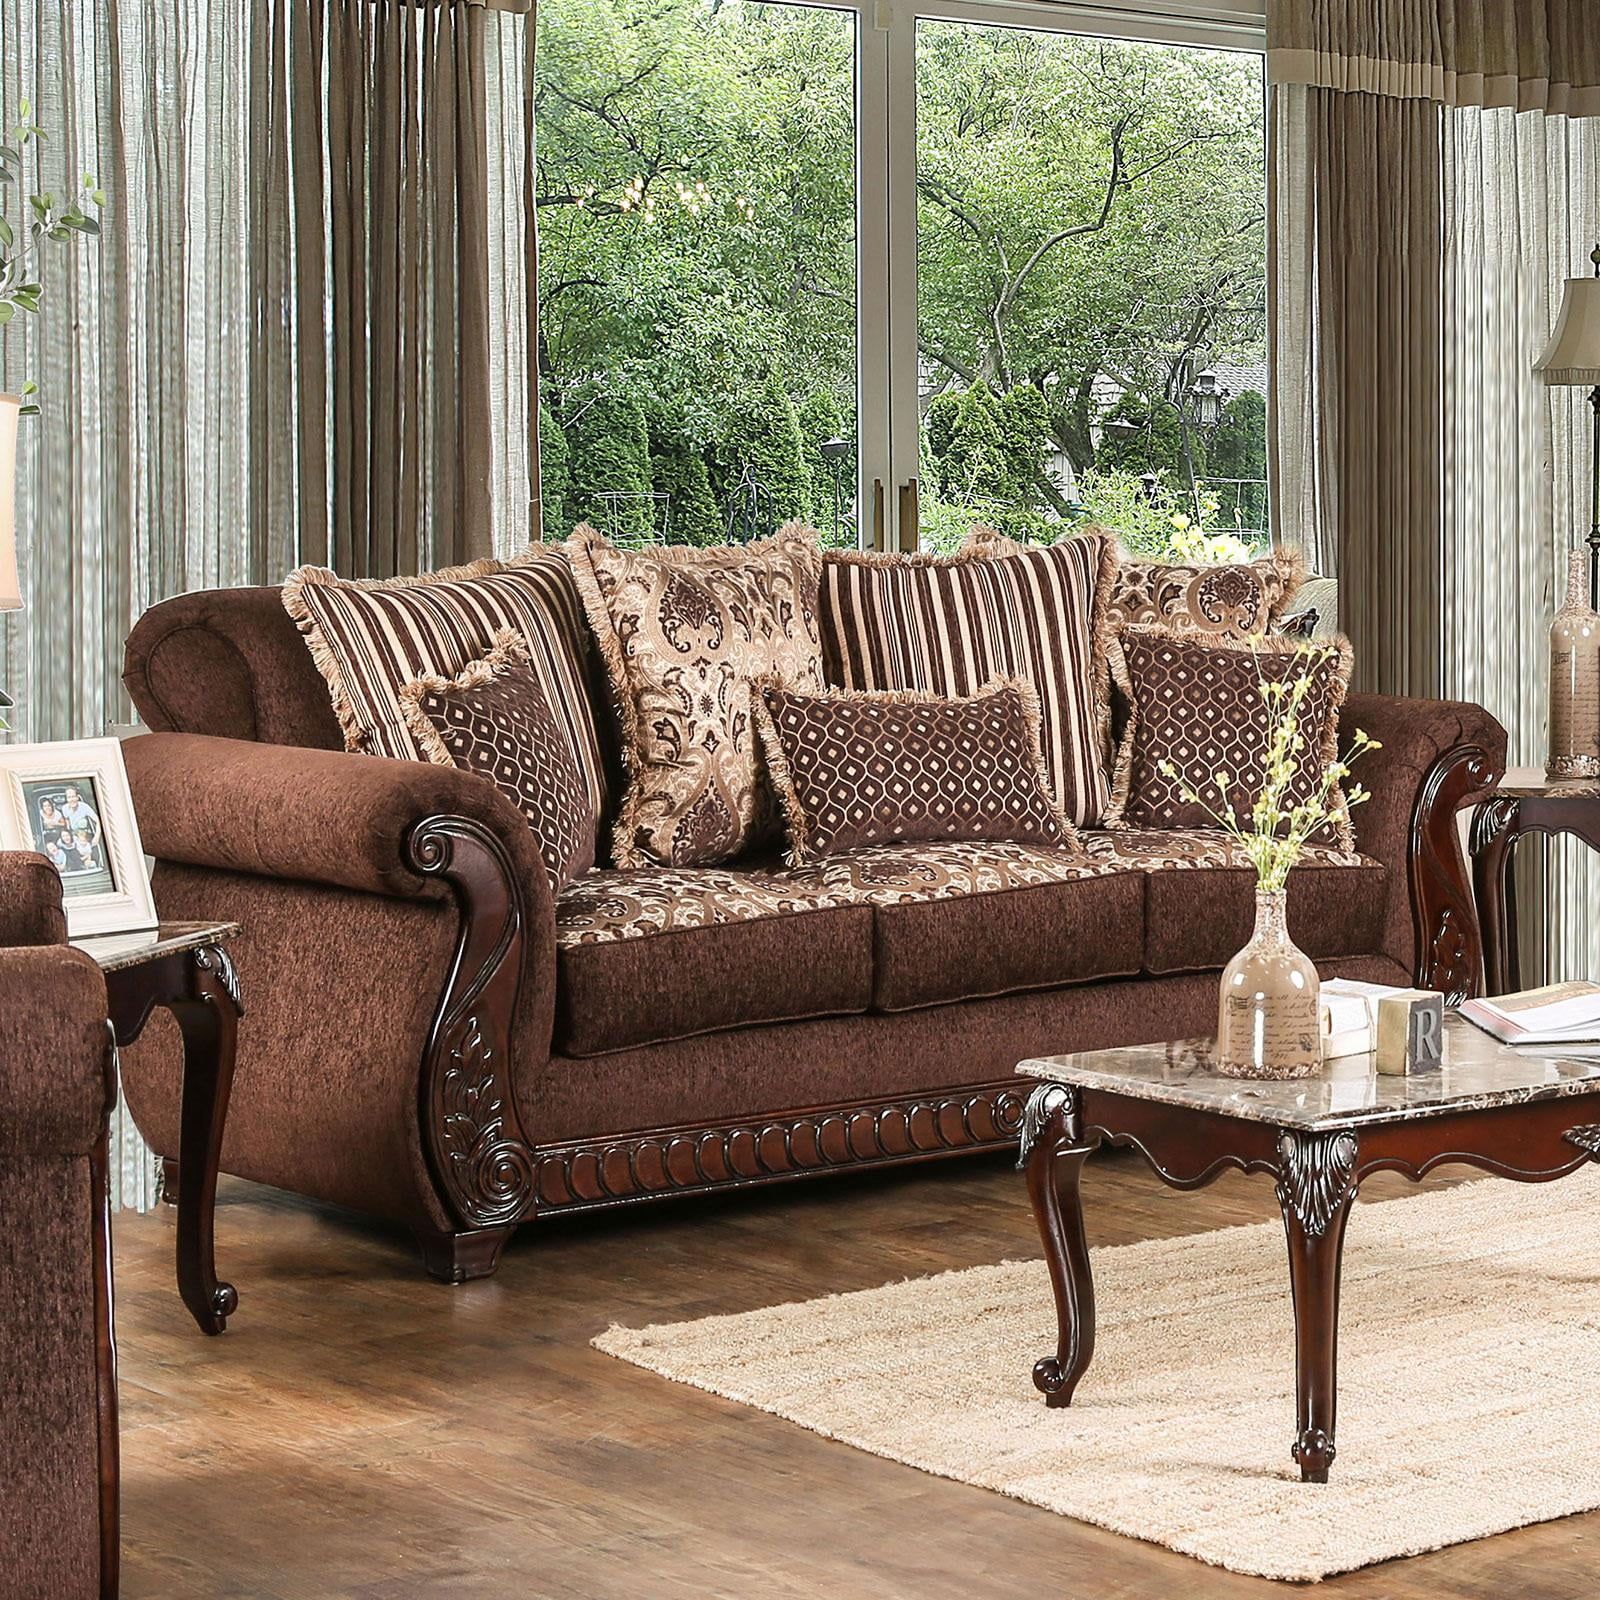 Traditional Fabric Upholstery Sofa In Brown Sm6109 Tabithafoa Group With Regard To Sofas In Pattern (Gallery 14 of 20)